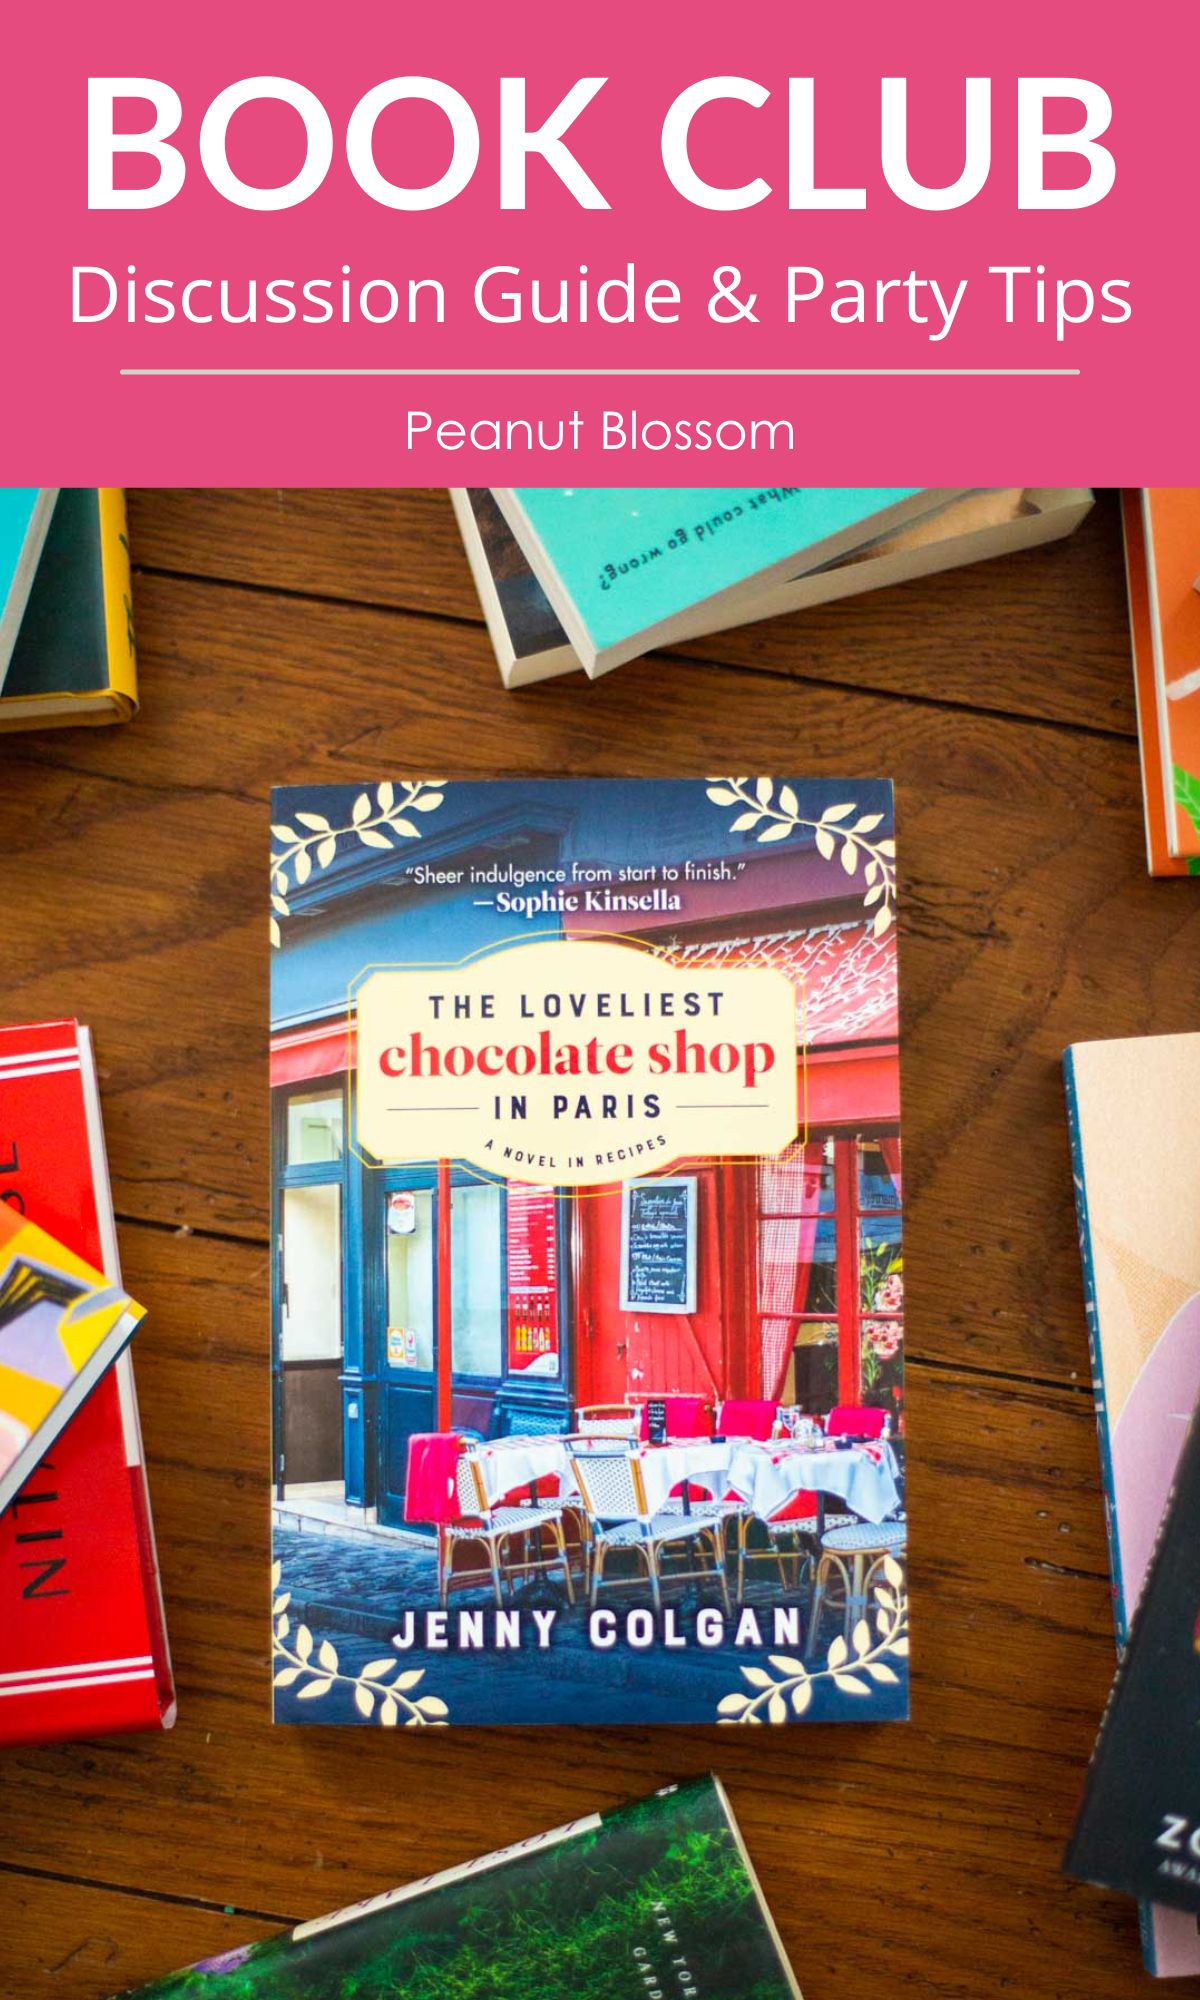 A copy of The Loveliest Chocolate Shop in Paris by Jenny Colgan sits on a table.